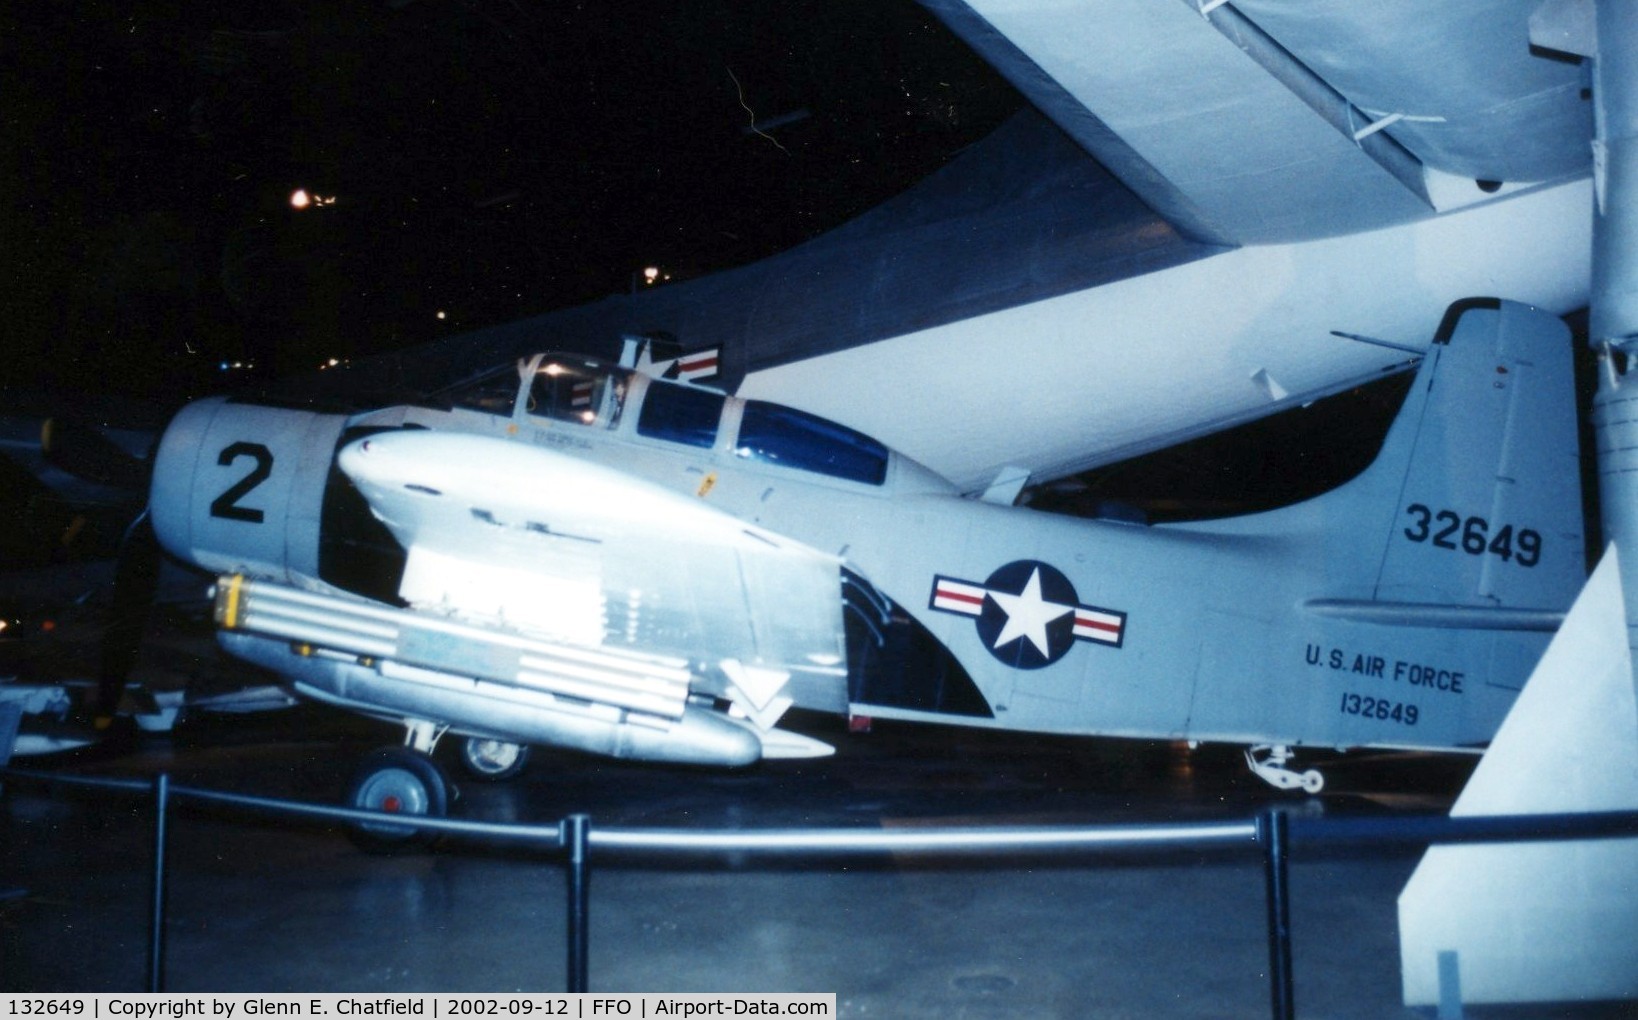 132649, 1952 Douglas A-1E Skyraider C/N 9506, A-1E Medal of Honor winner flew in Vietnam, now at the Air Force Museum. USAF redesignated it as 52-132649